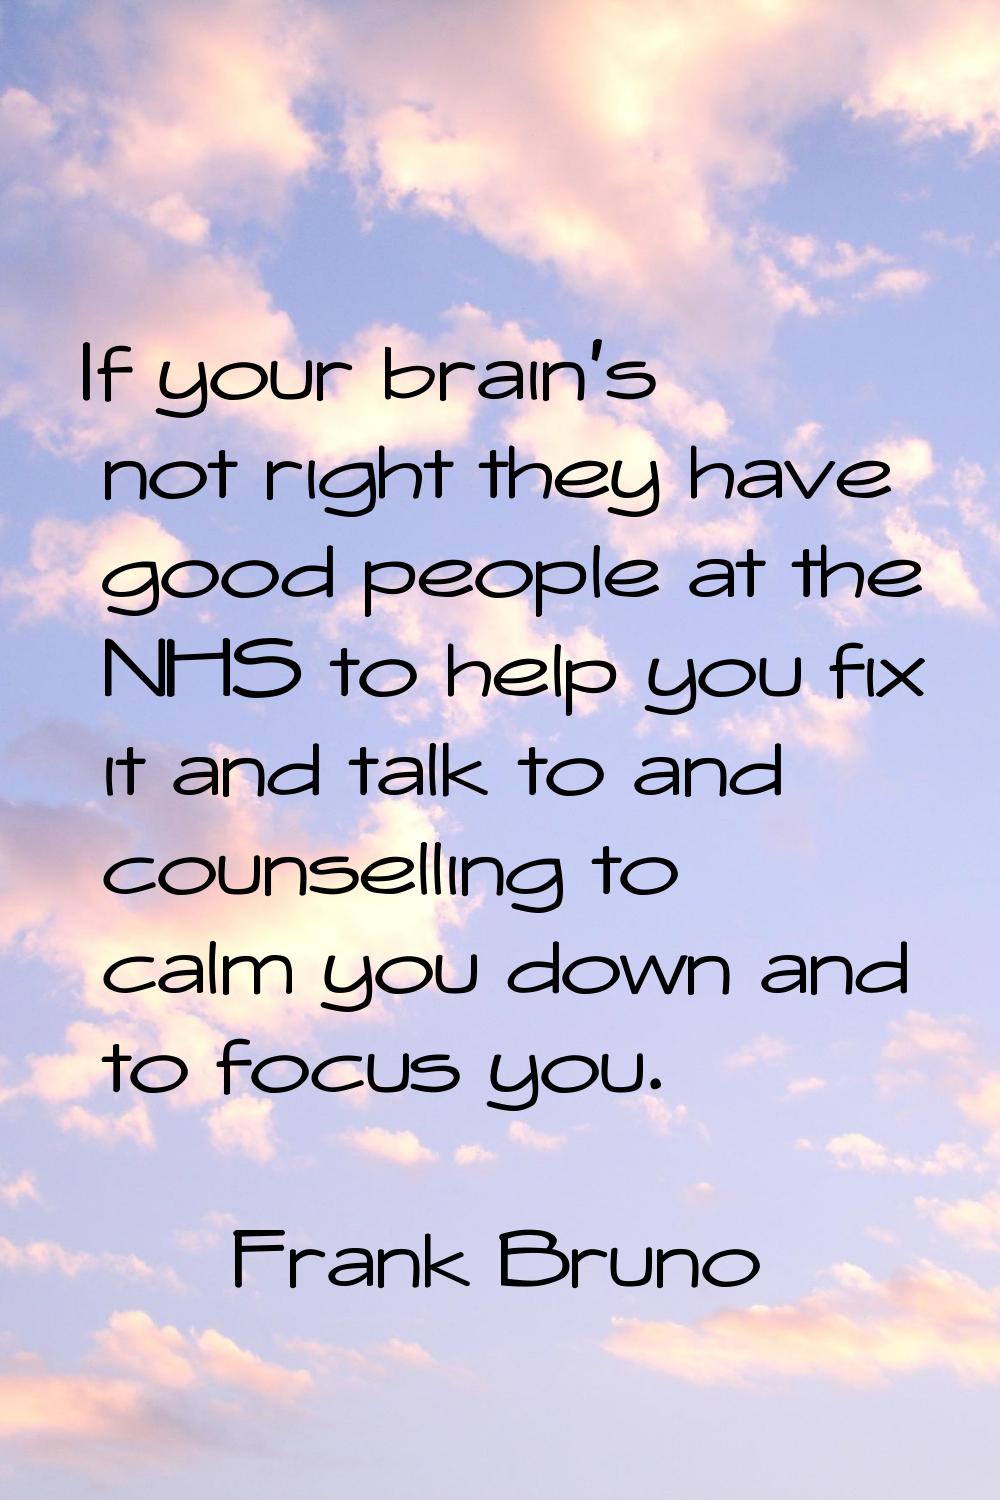 If your brain's not right they have good people at the NHS to help you fix it and talk to and couns